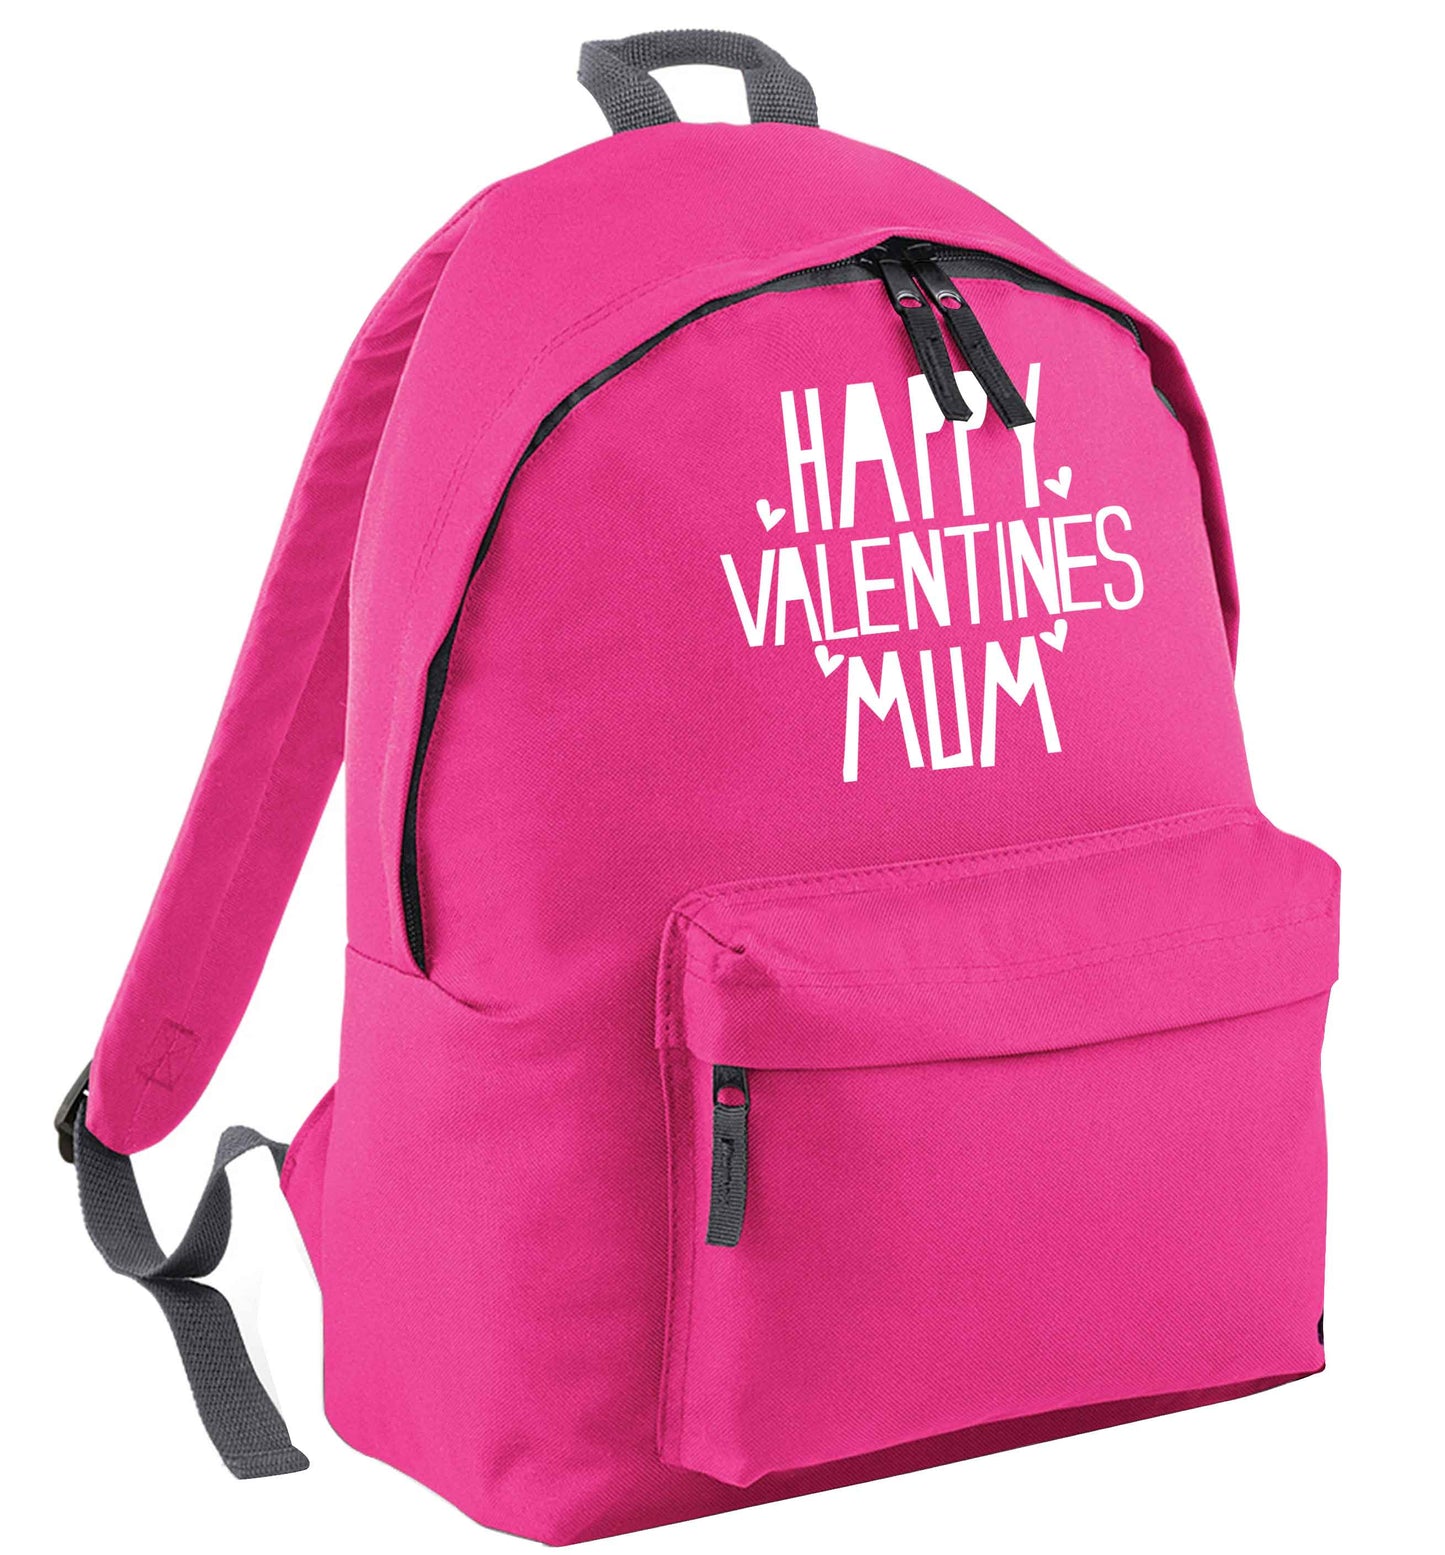 Happy valentines mum pink adults backpack